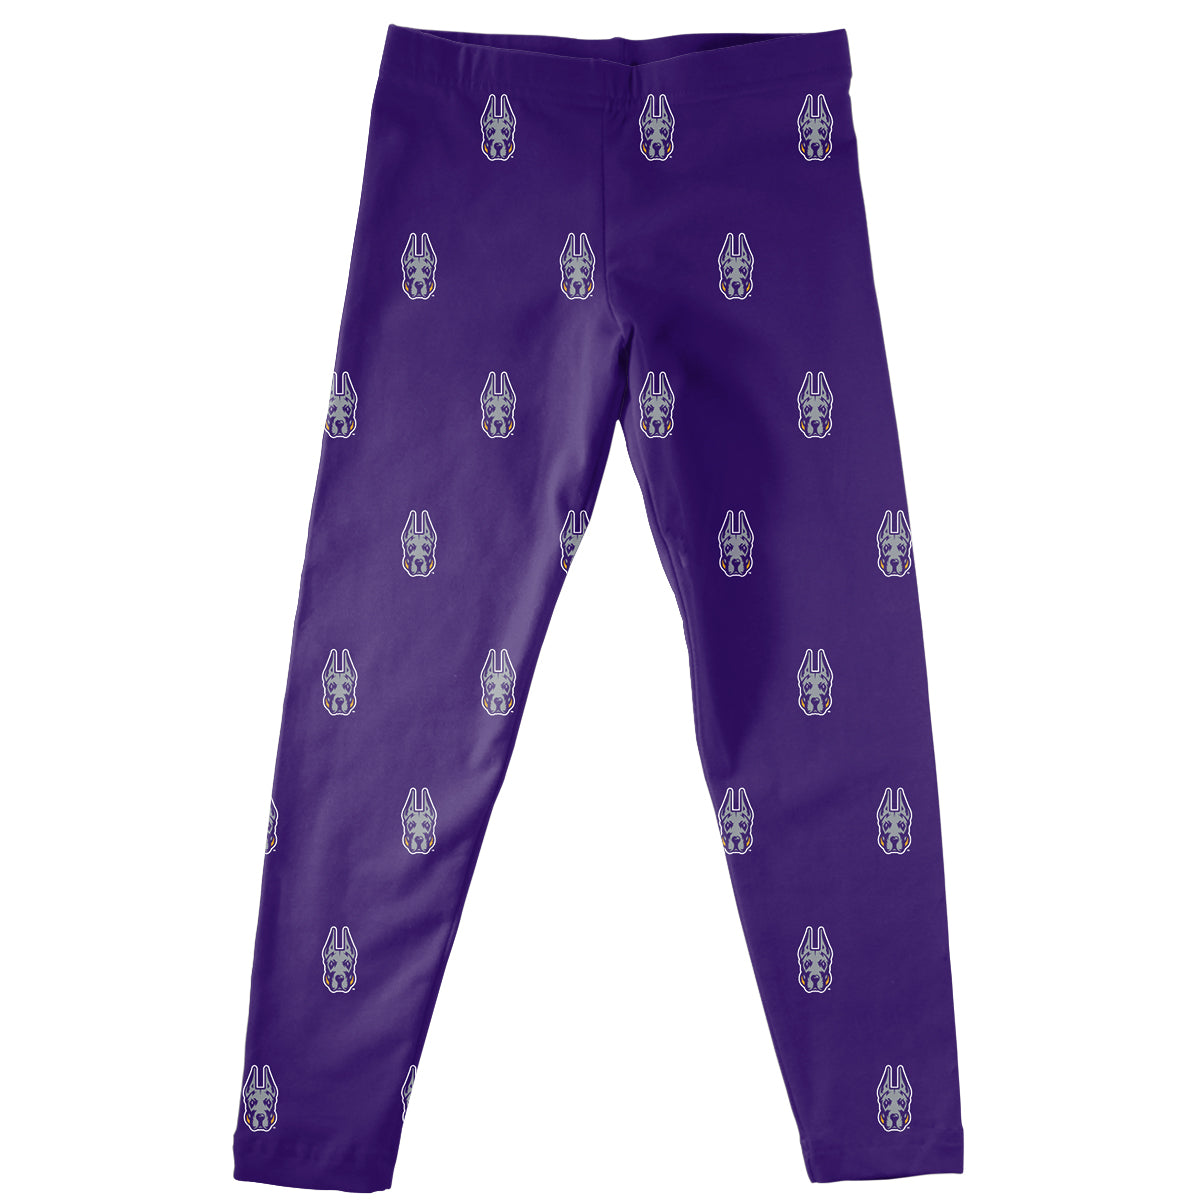 UALBANY Great Danes Girls Game Day Classic Play Purple Leggings Tights